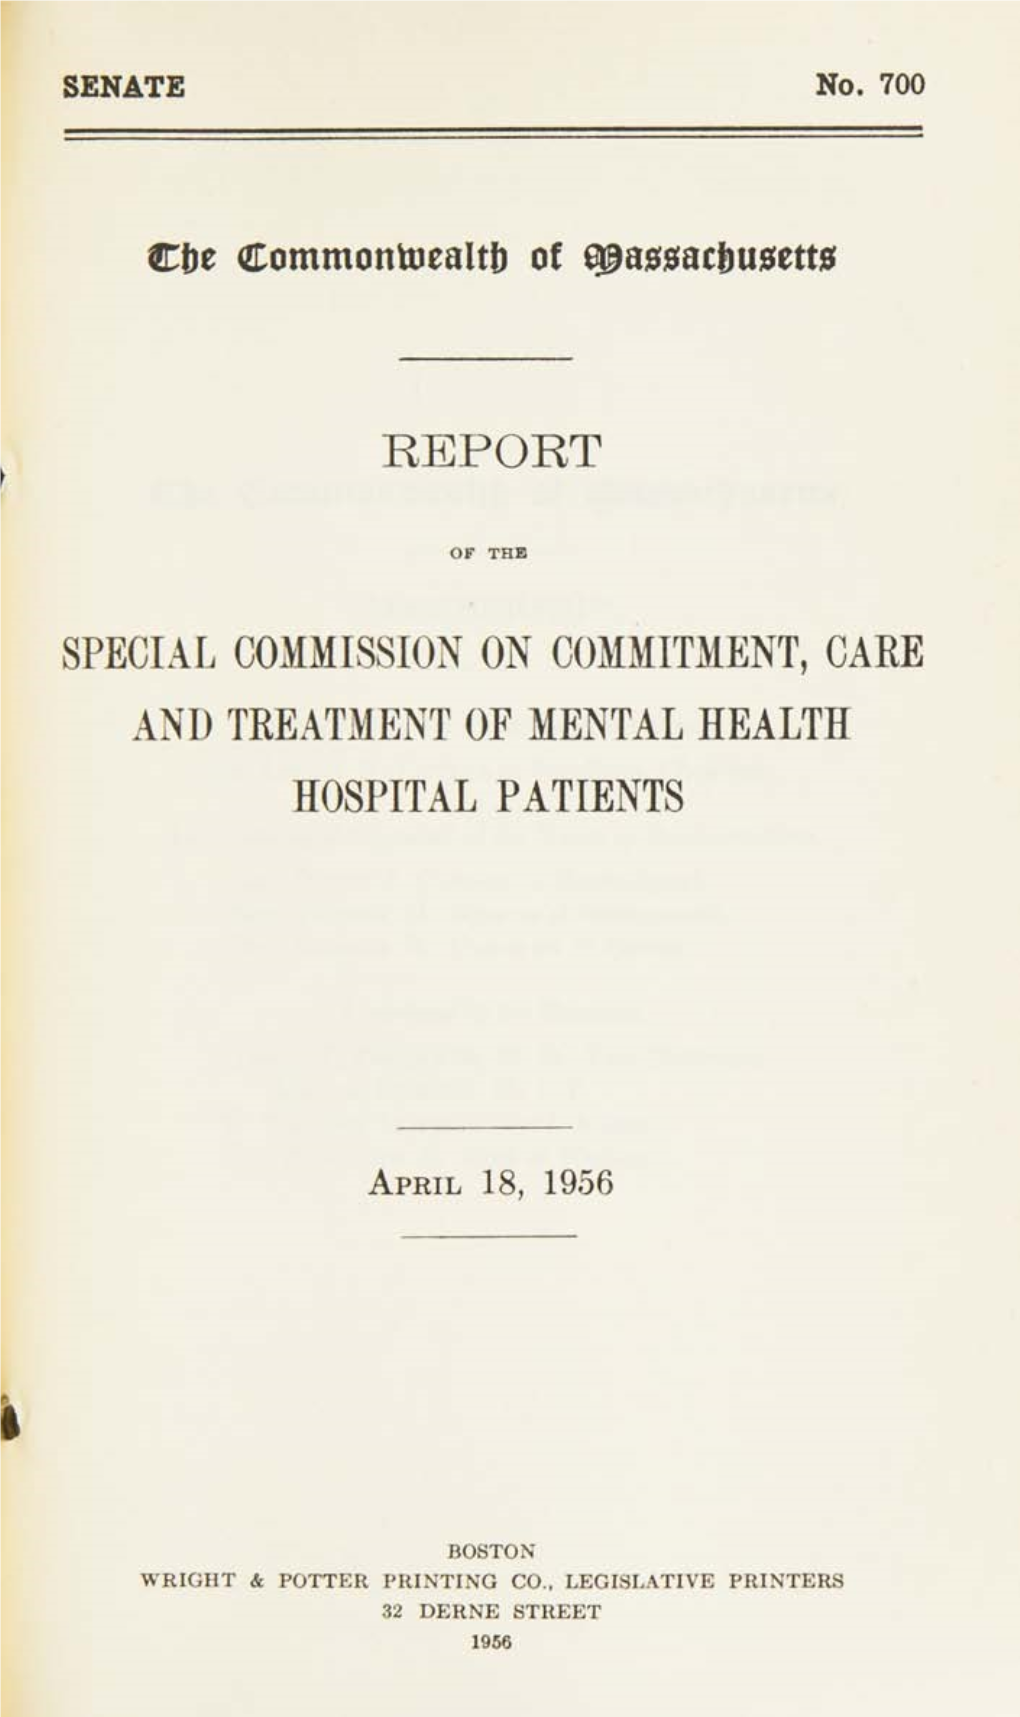 On Commitment, Care and Treatment of Mental Health Hospital Patients